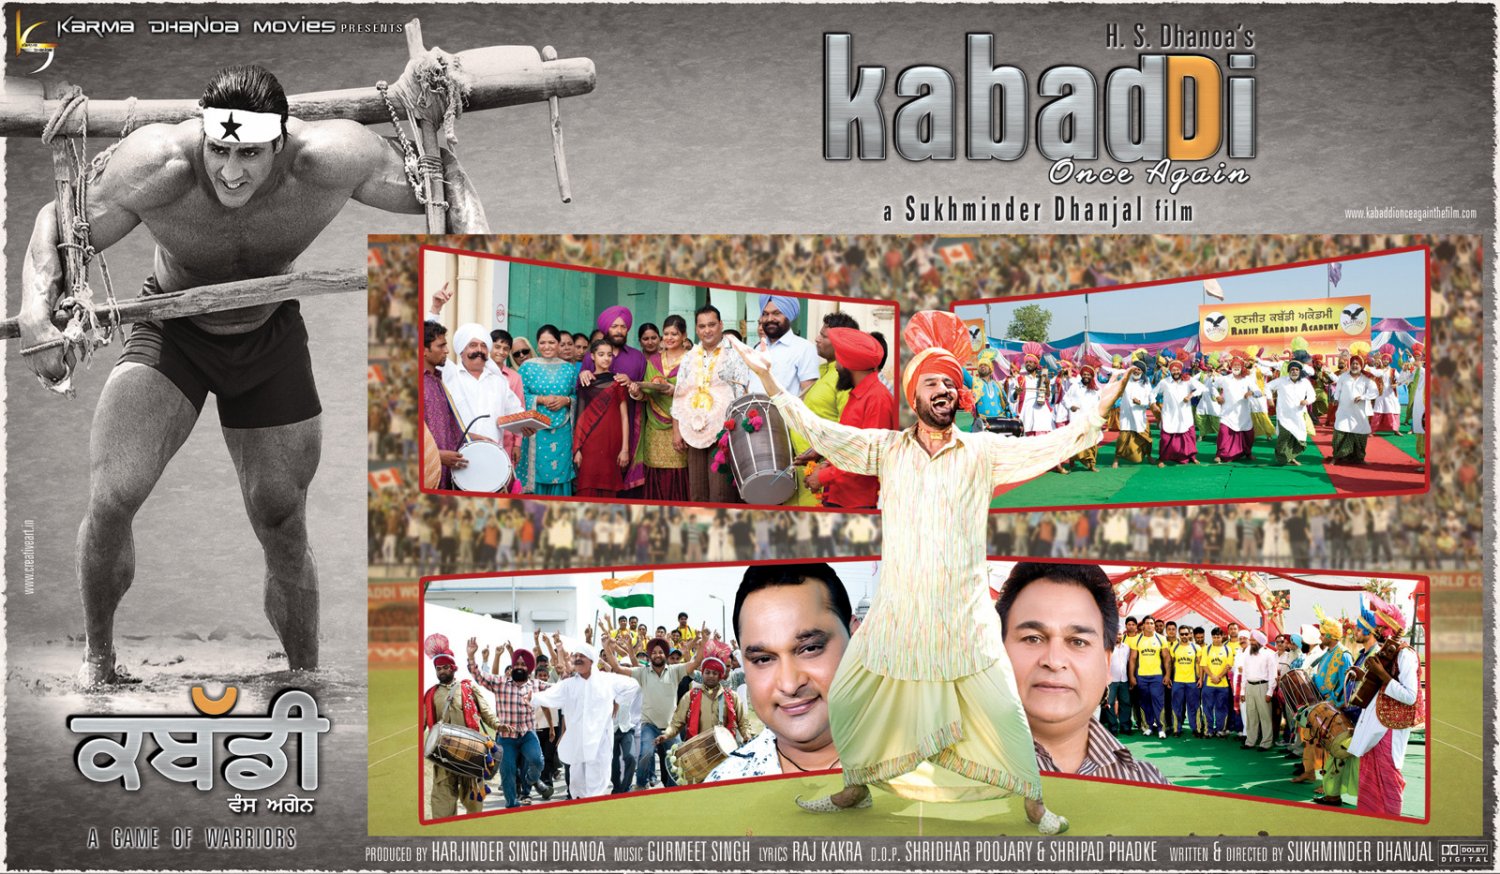 Extra Large Movie Poster Image for Kabaddi Once Again (#4 of 10)